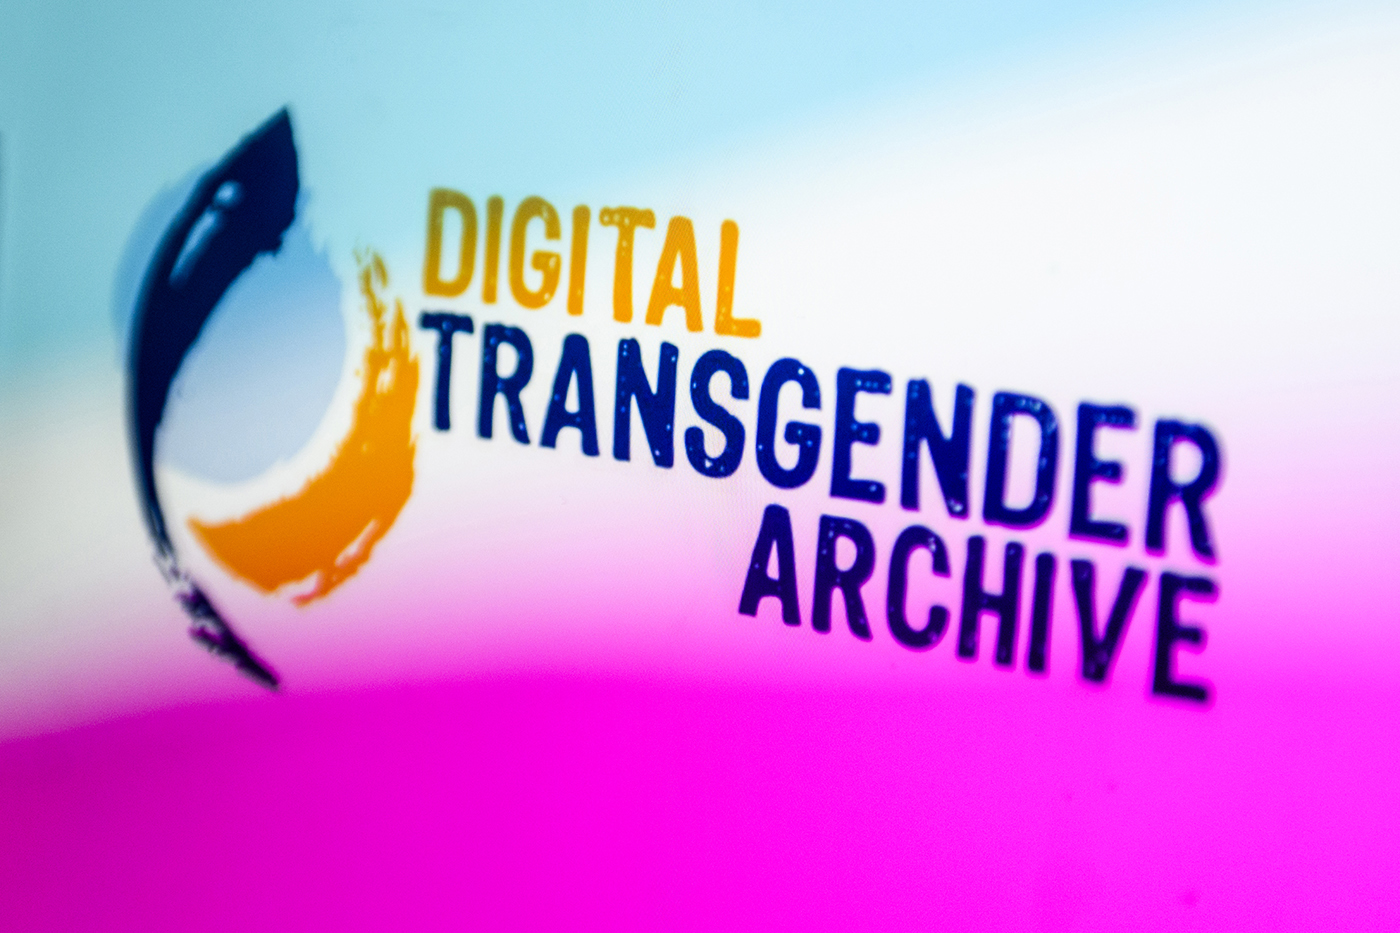 A multi-colored graphic with orange and blue text: "Digital Transgender Archive."